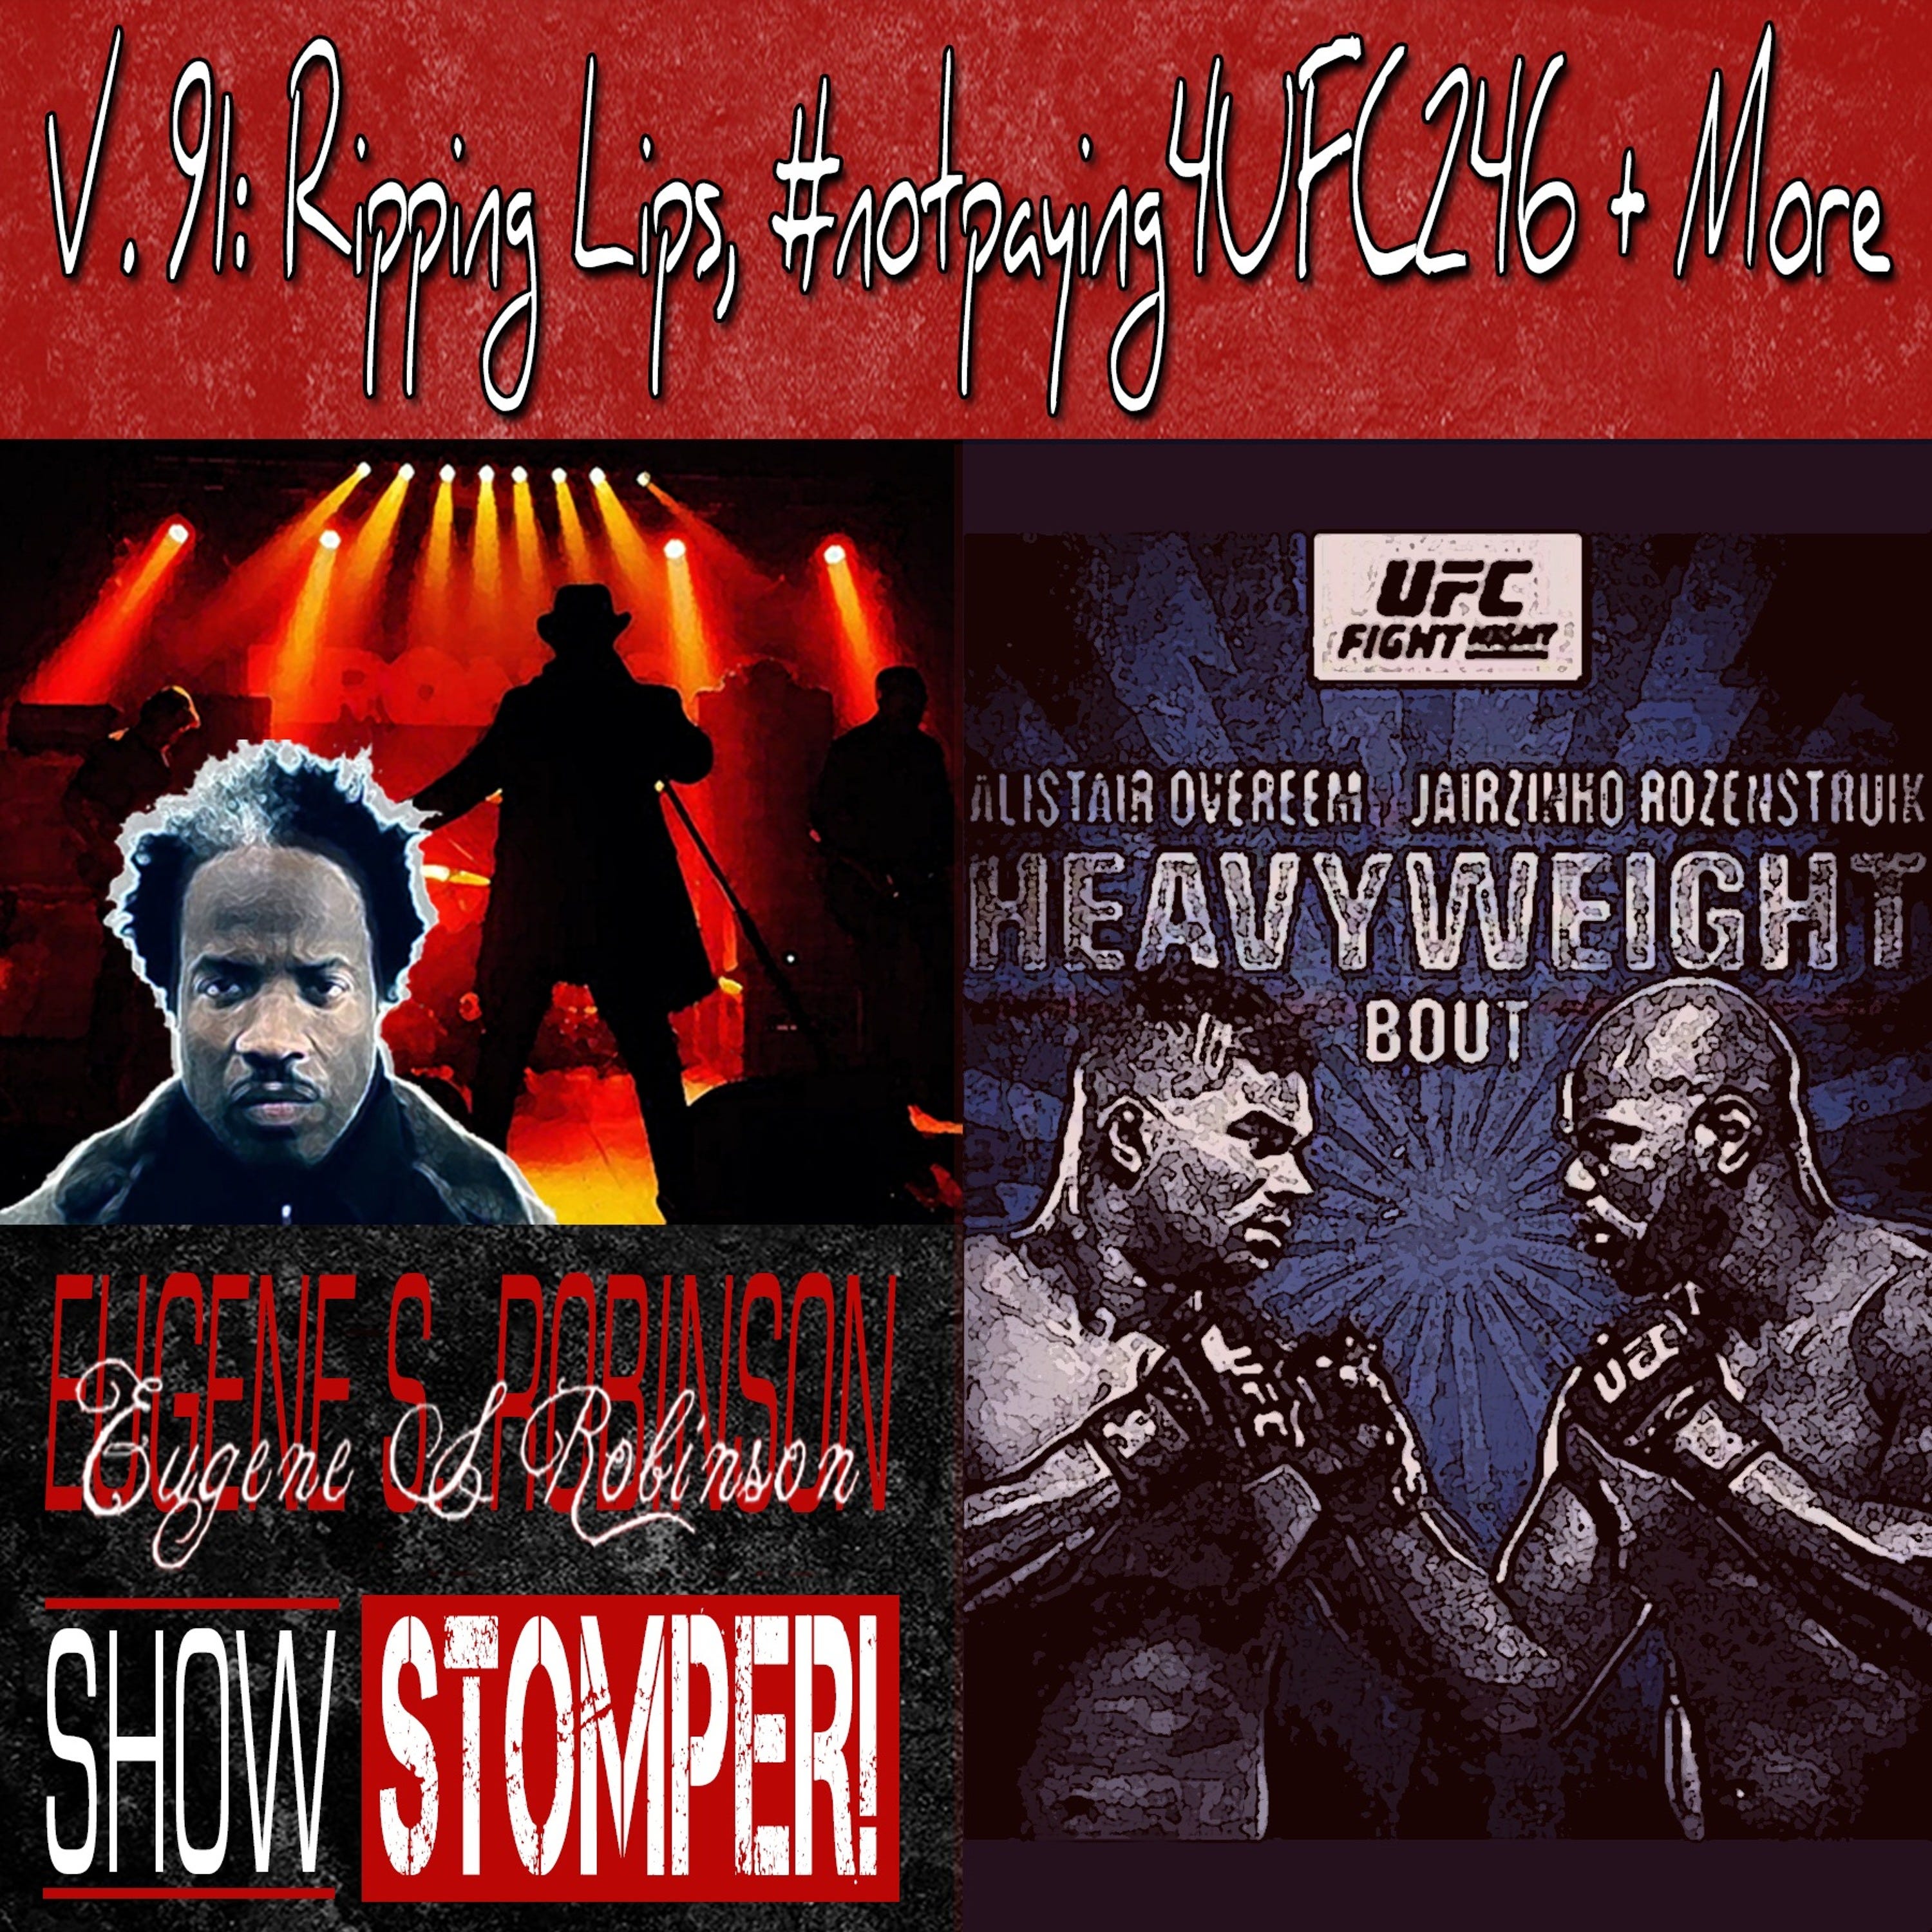 V. 91 Ripping Lips, #notpaying4UFC246 + More On The Eugene S. Robinson Show Stomper!